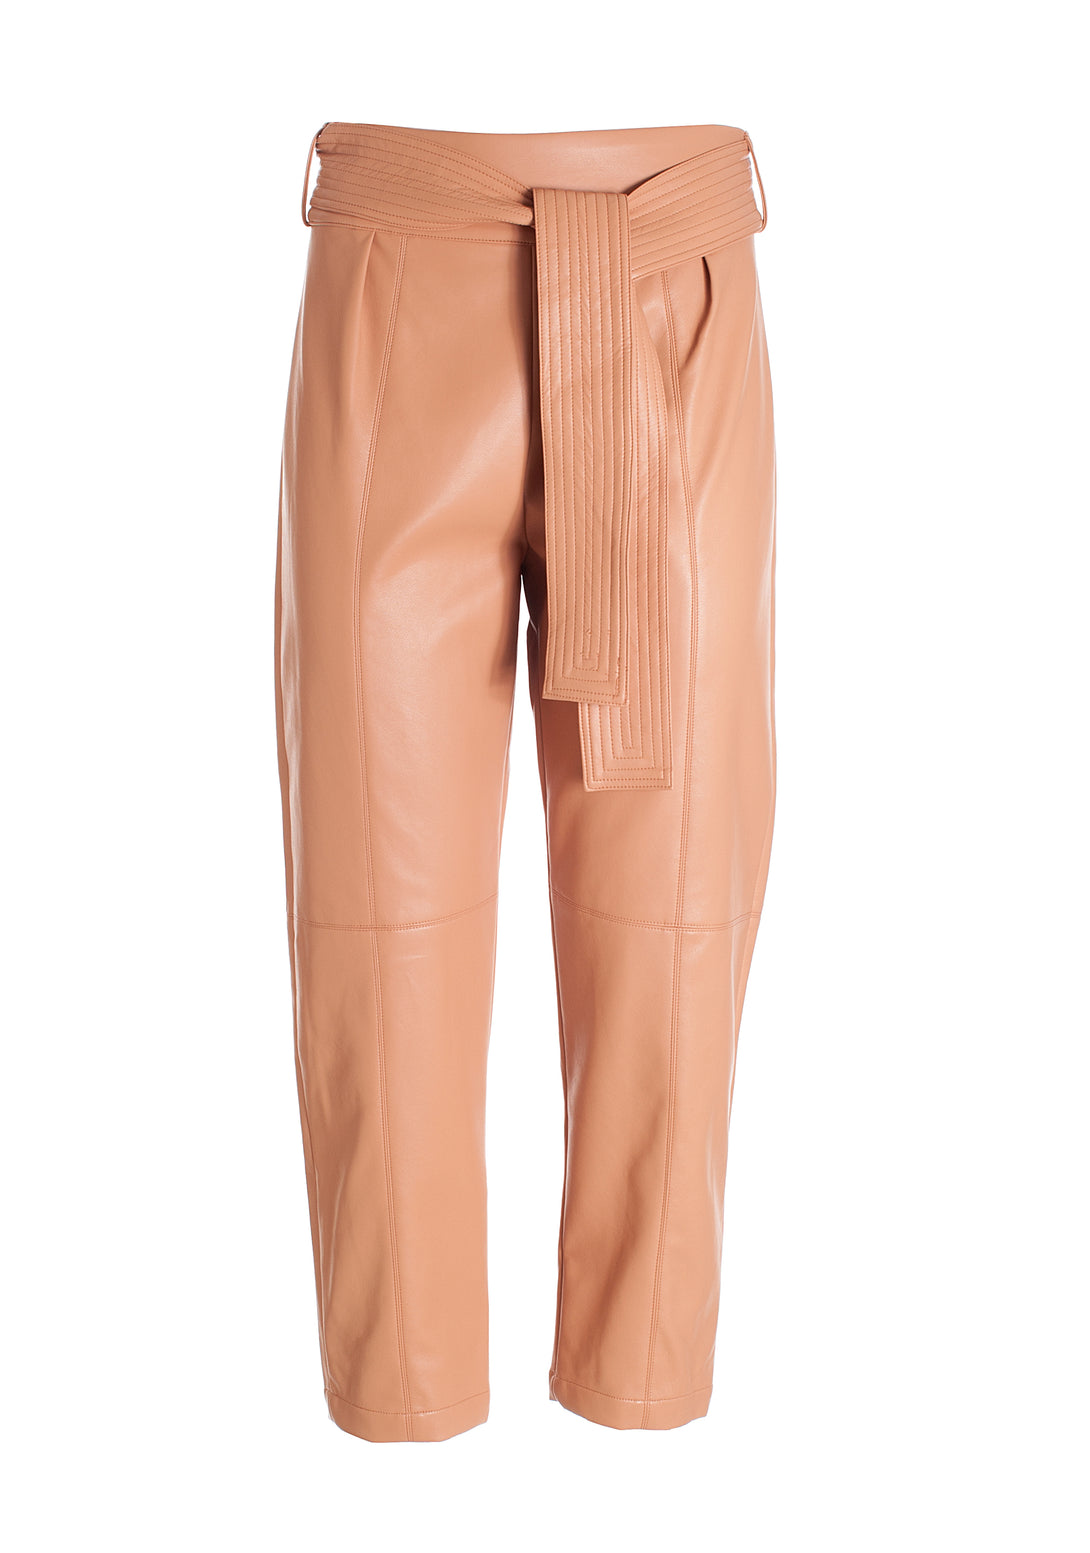 Pant straight line, cropped, made in eco leather